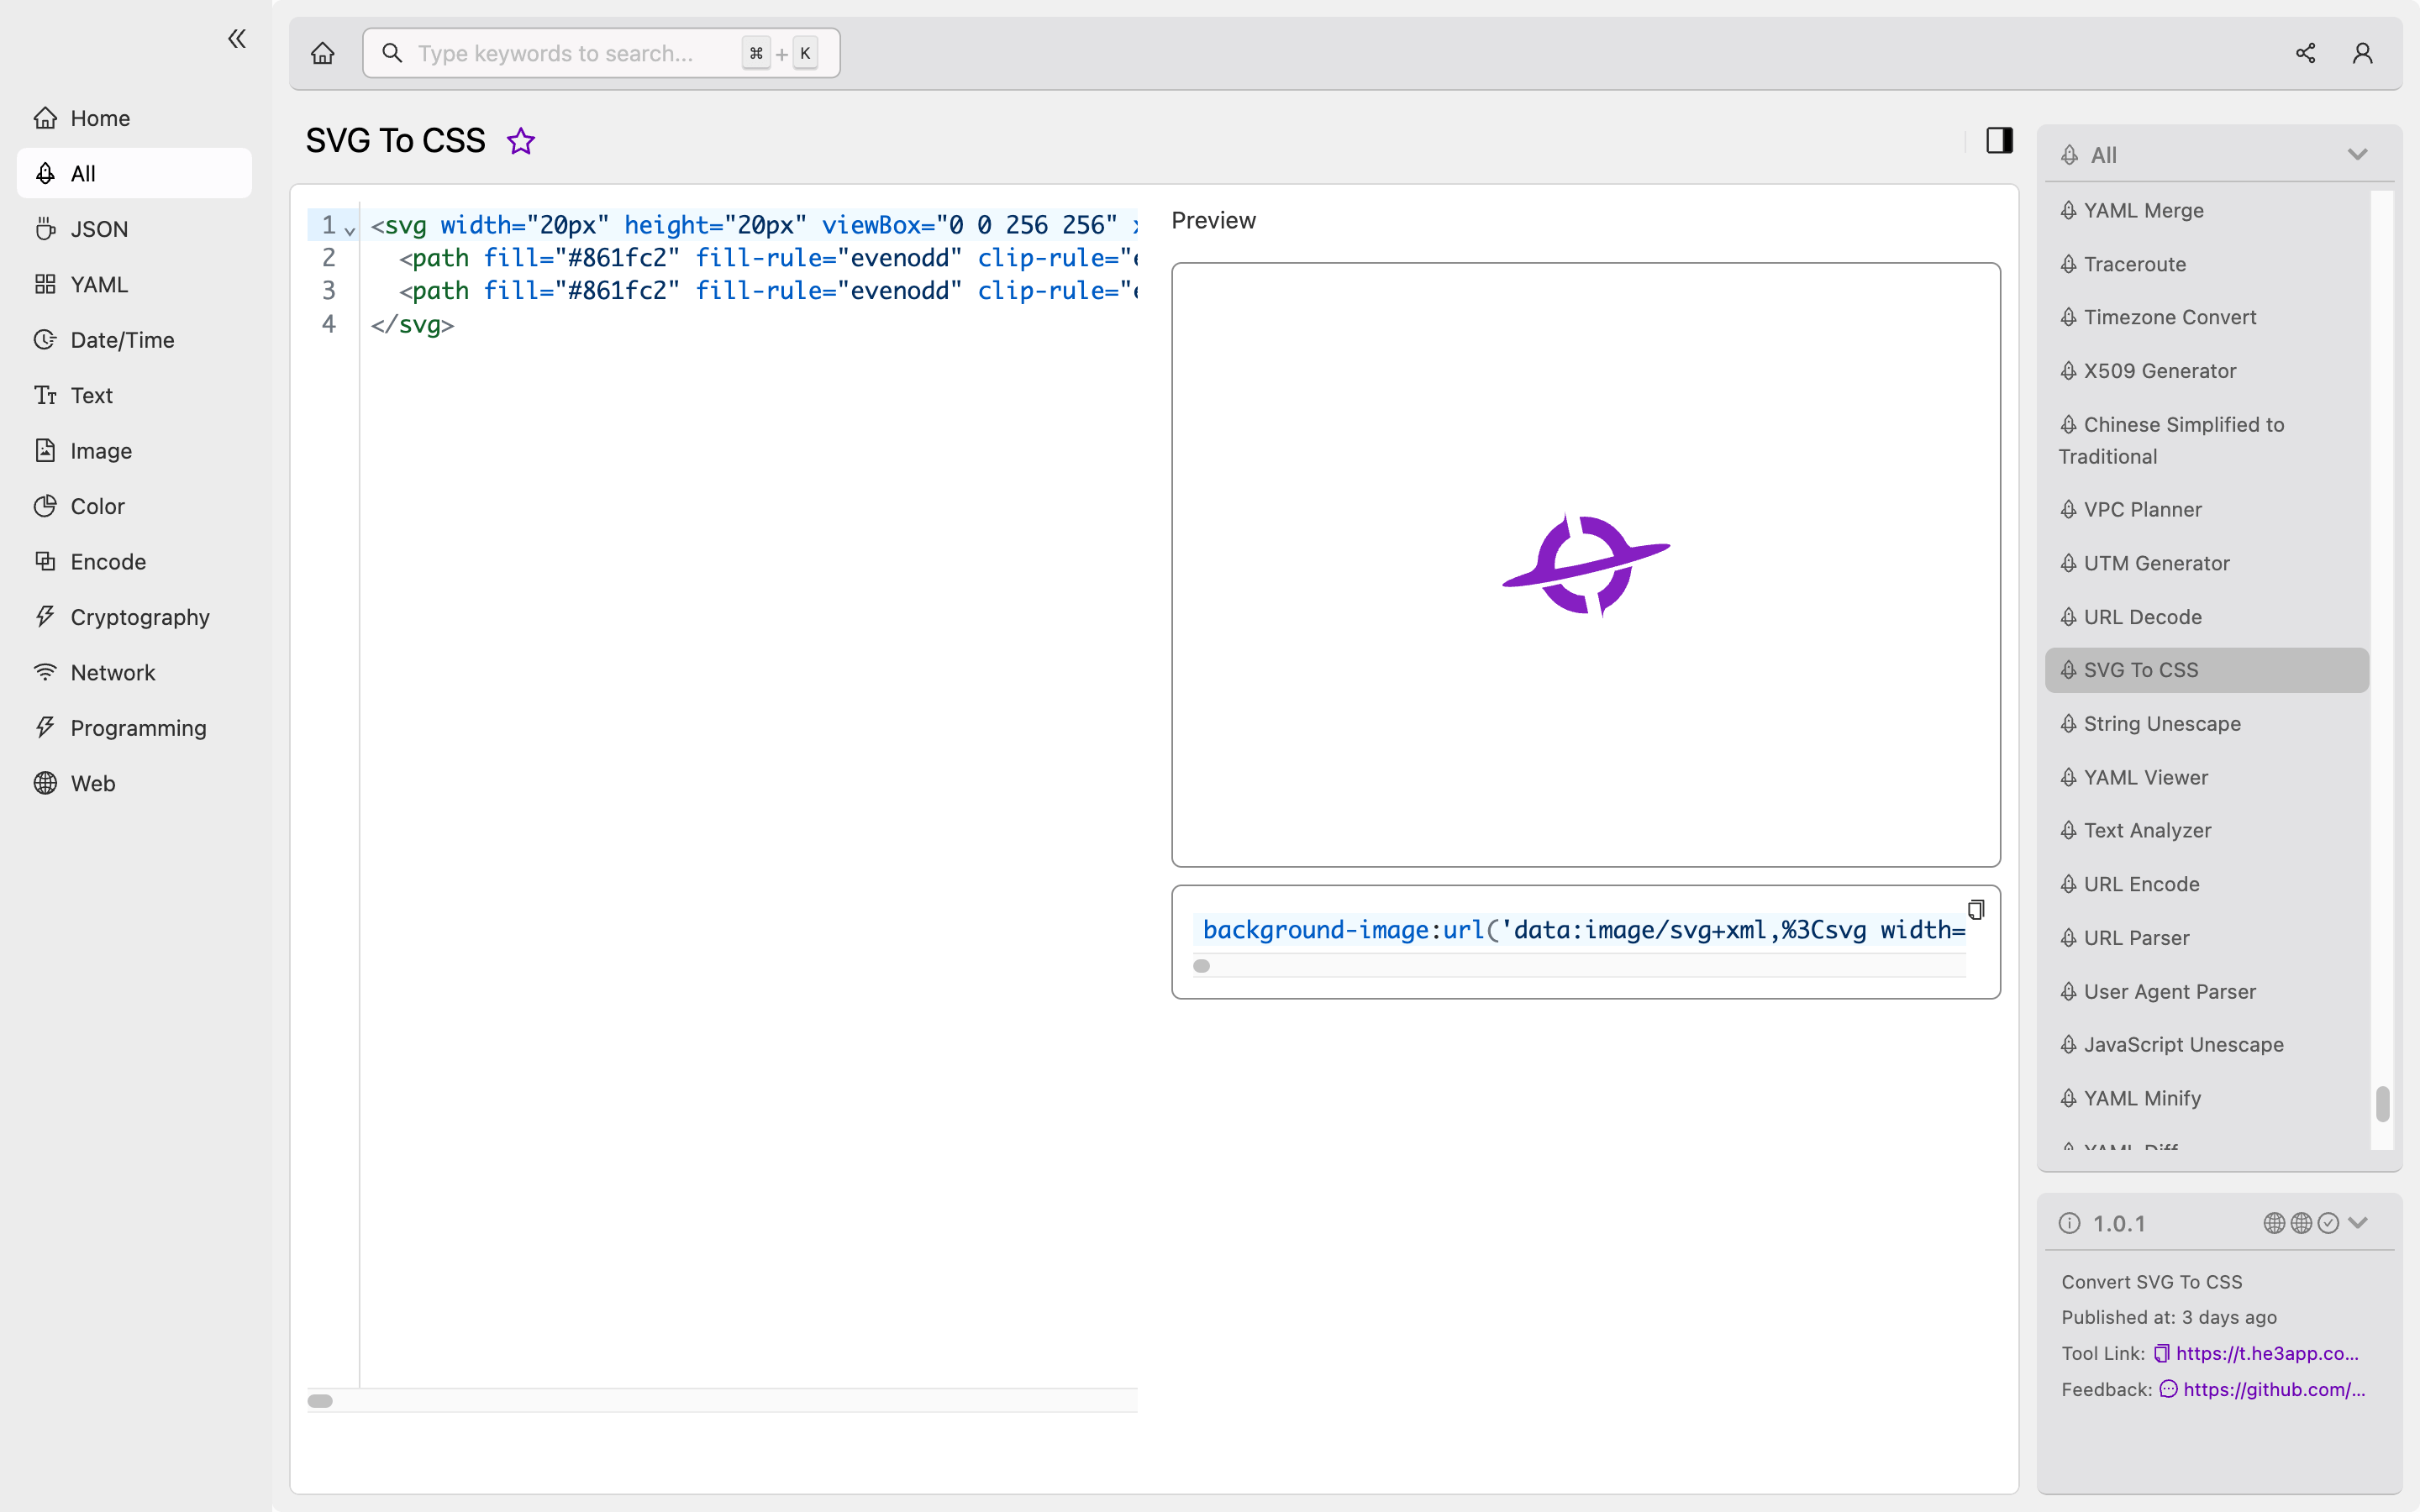 SVG To CSS